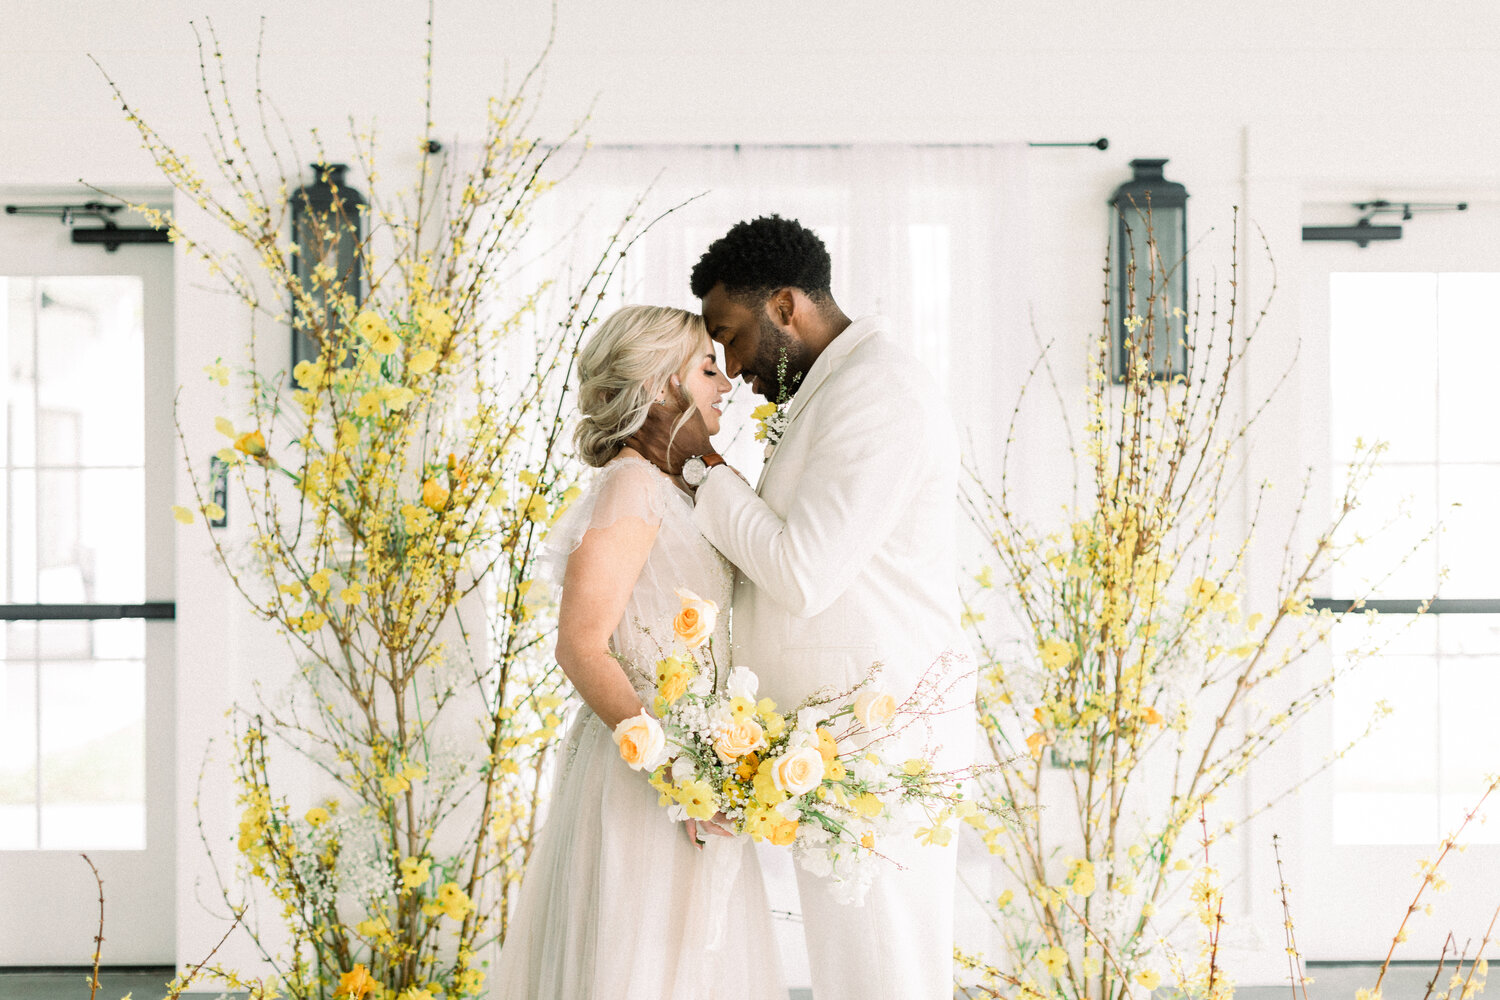 Bride and groom posing for wedding ceremony photos with yellow and white florals.